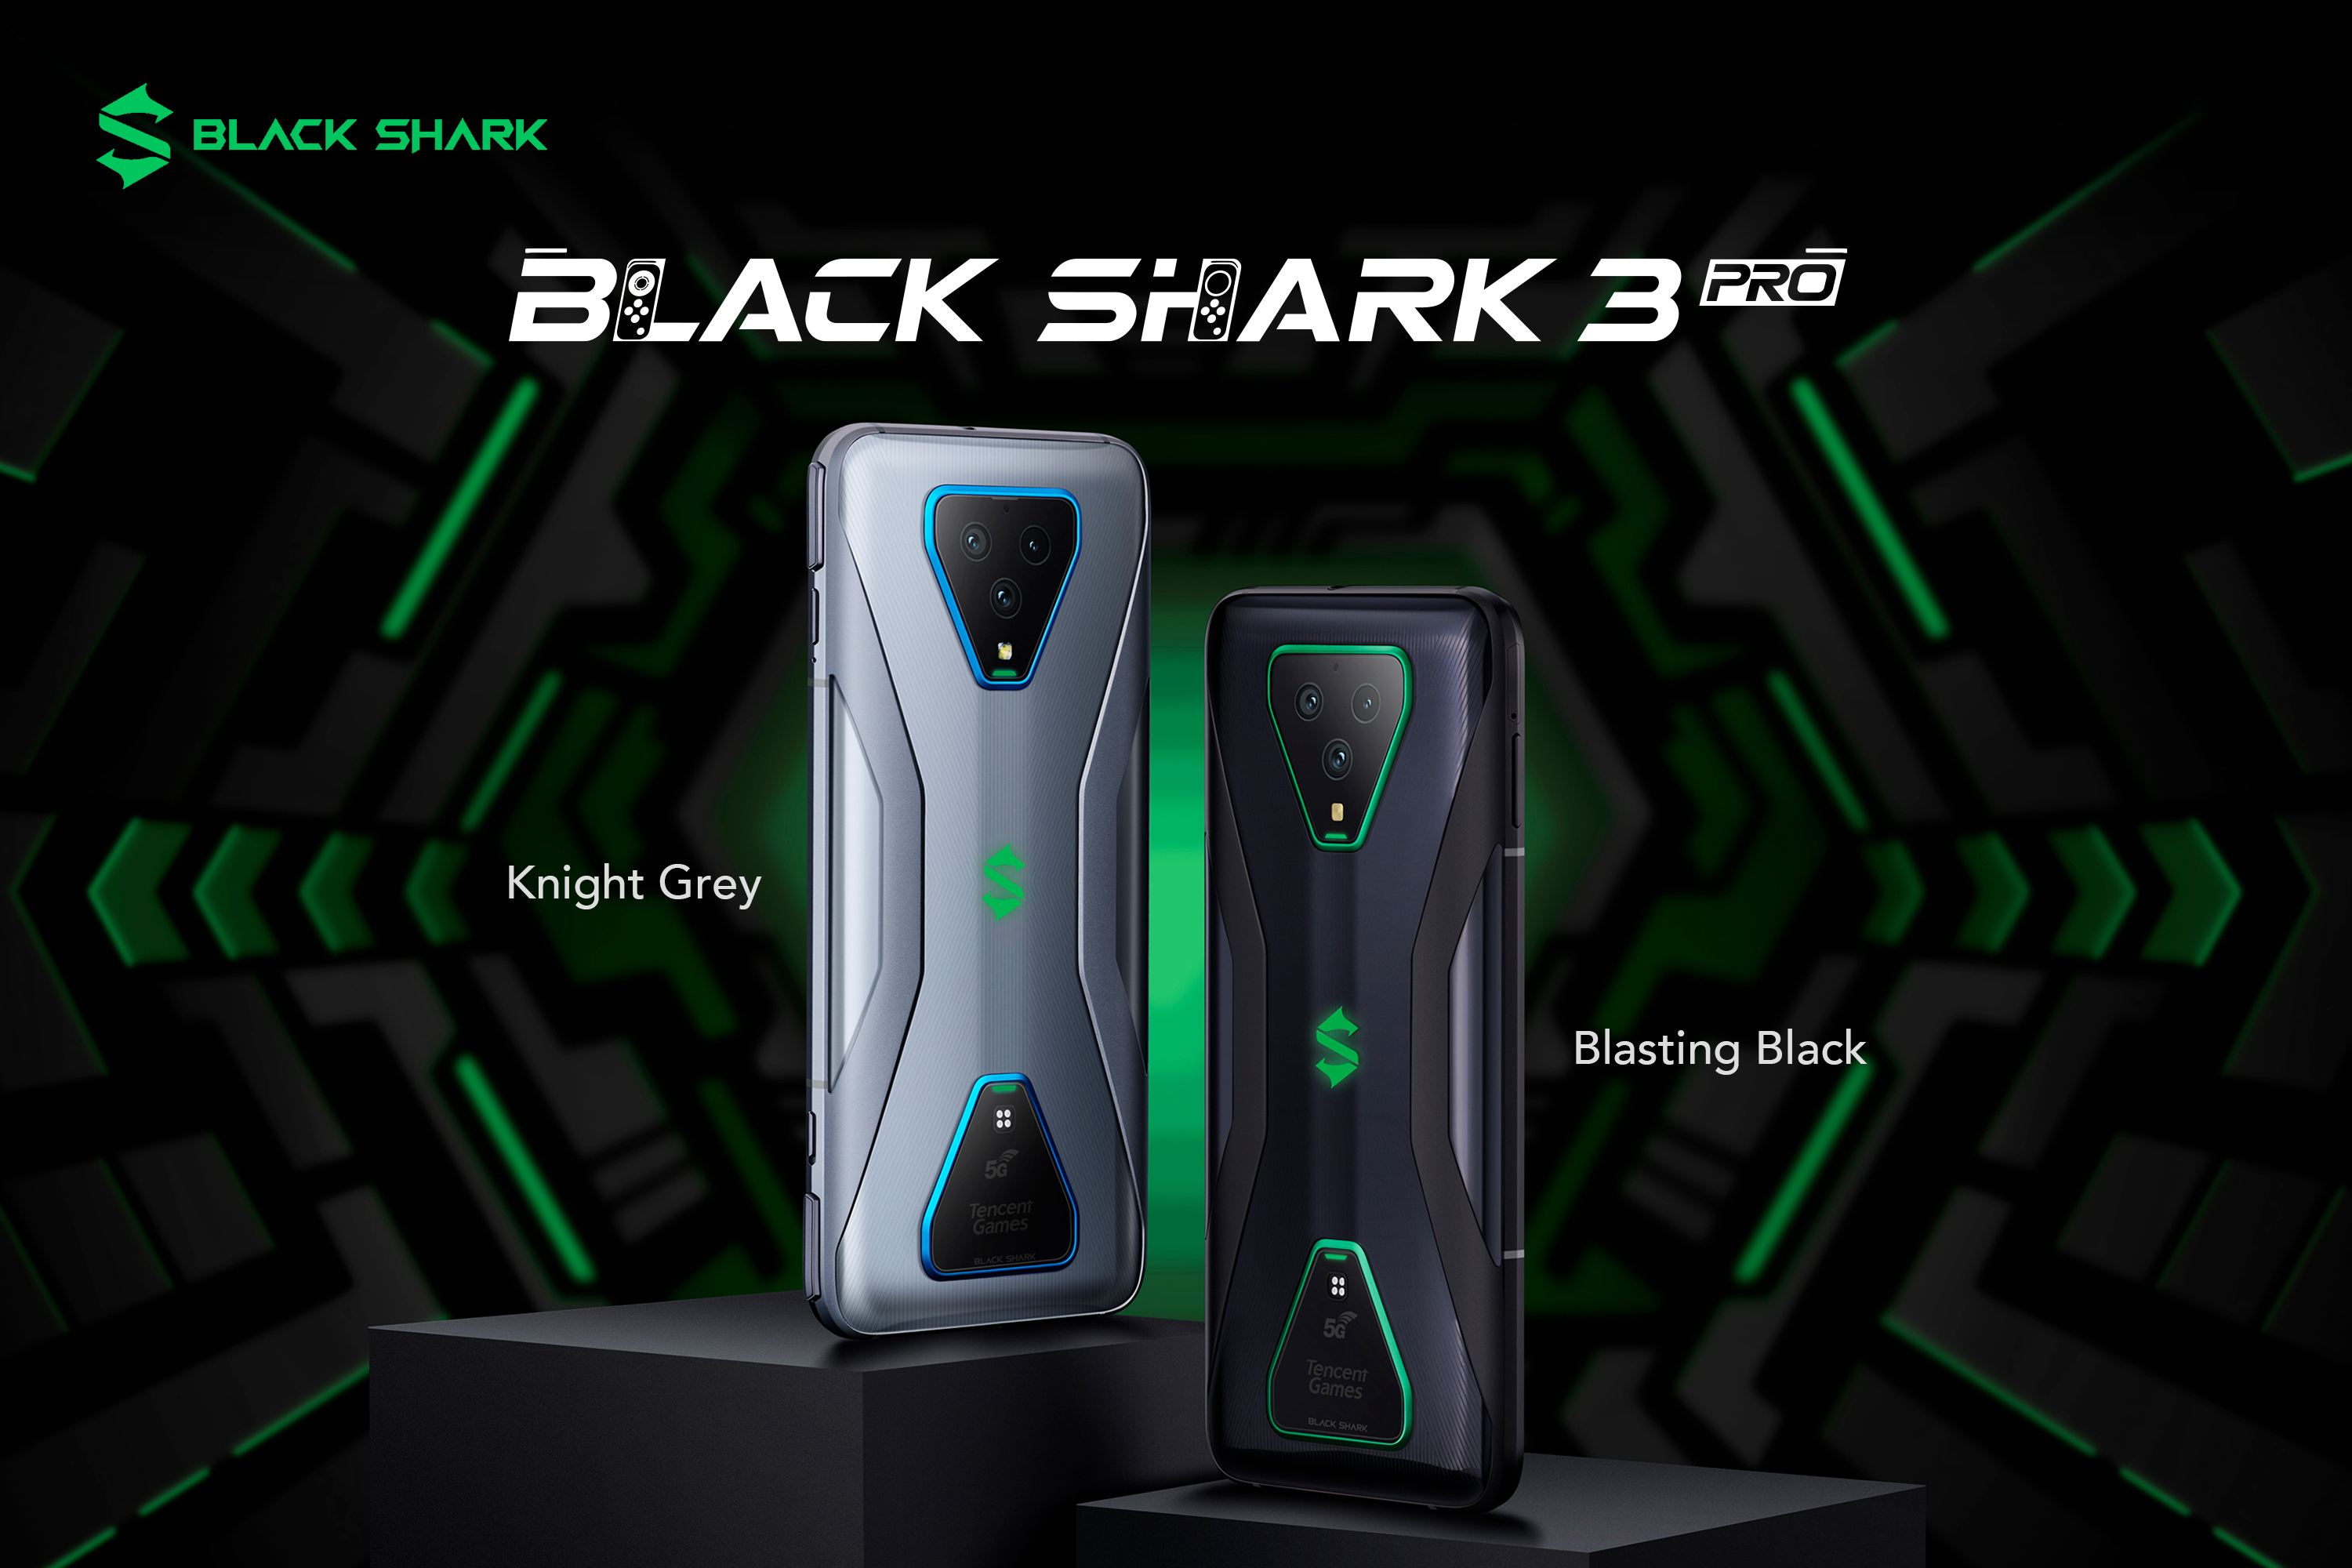 Black Shark Technologies Reveals New Brand Identity with New Corporate  Slogan “Game is Real”